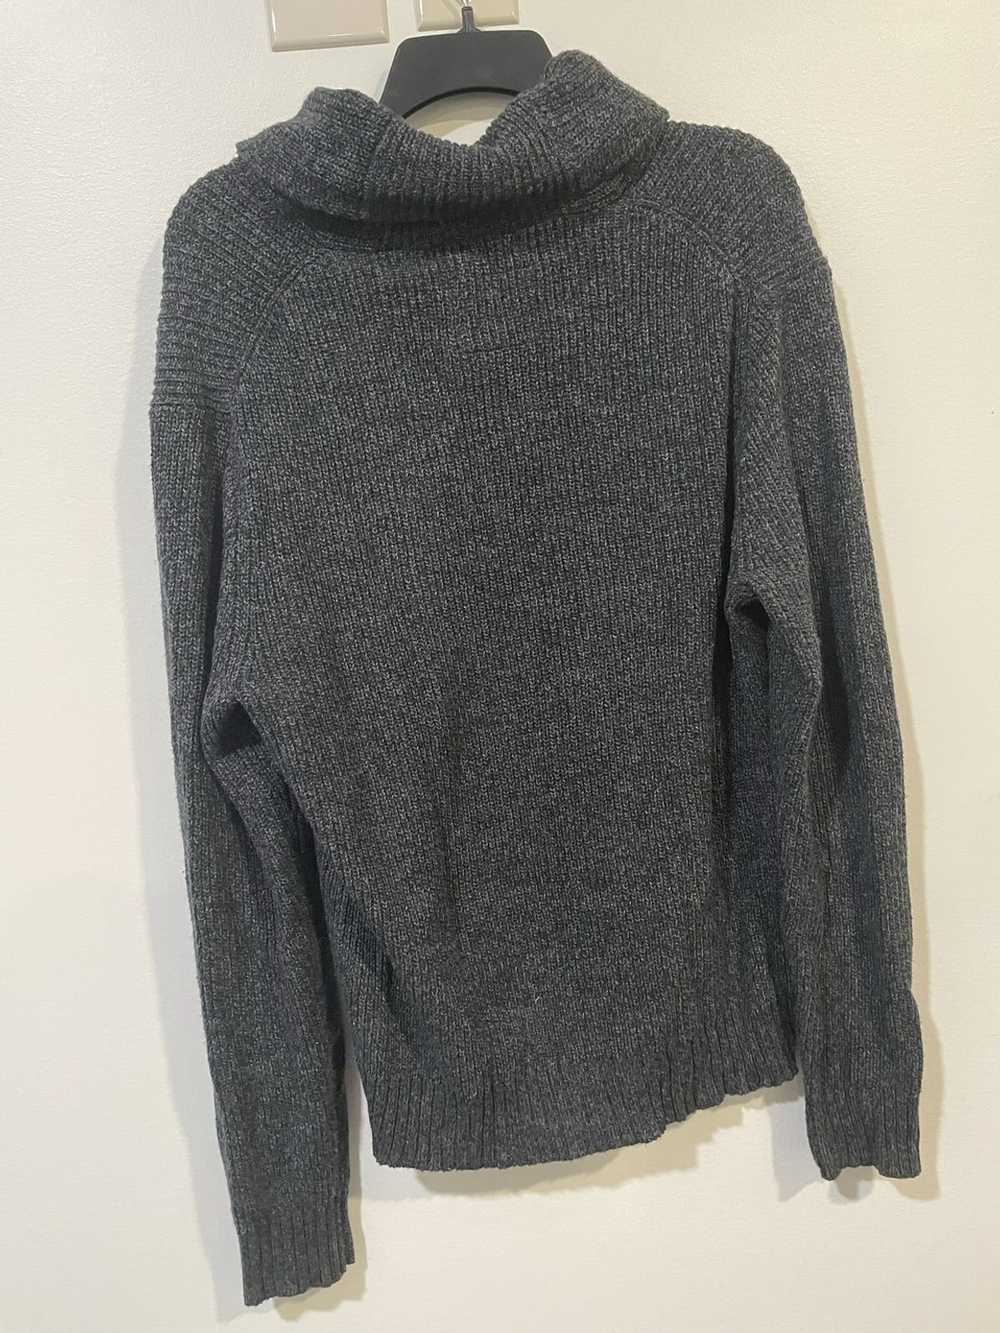 American Eagle Outfitters AE Big Neck Knit Sweater - image 2